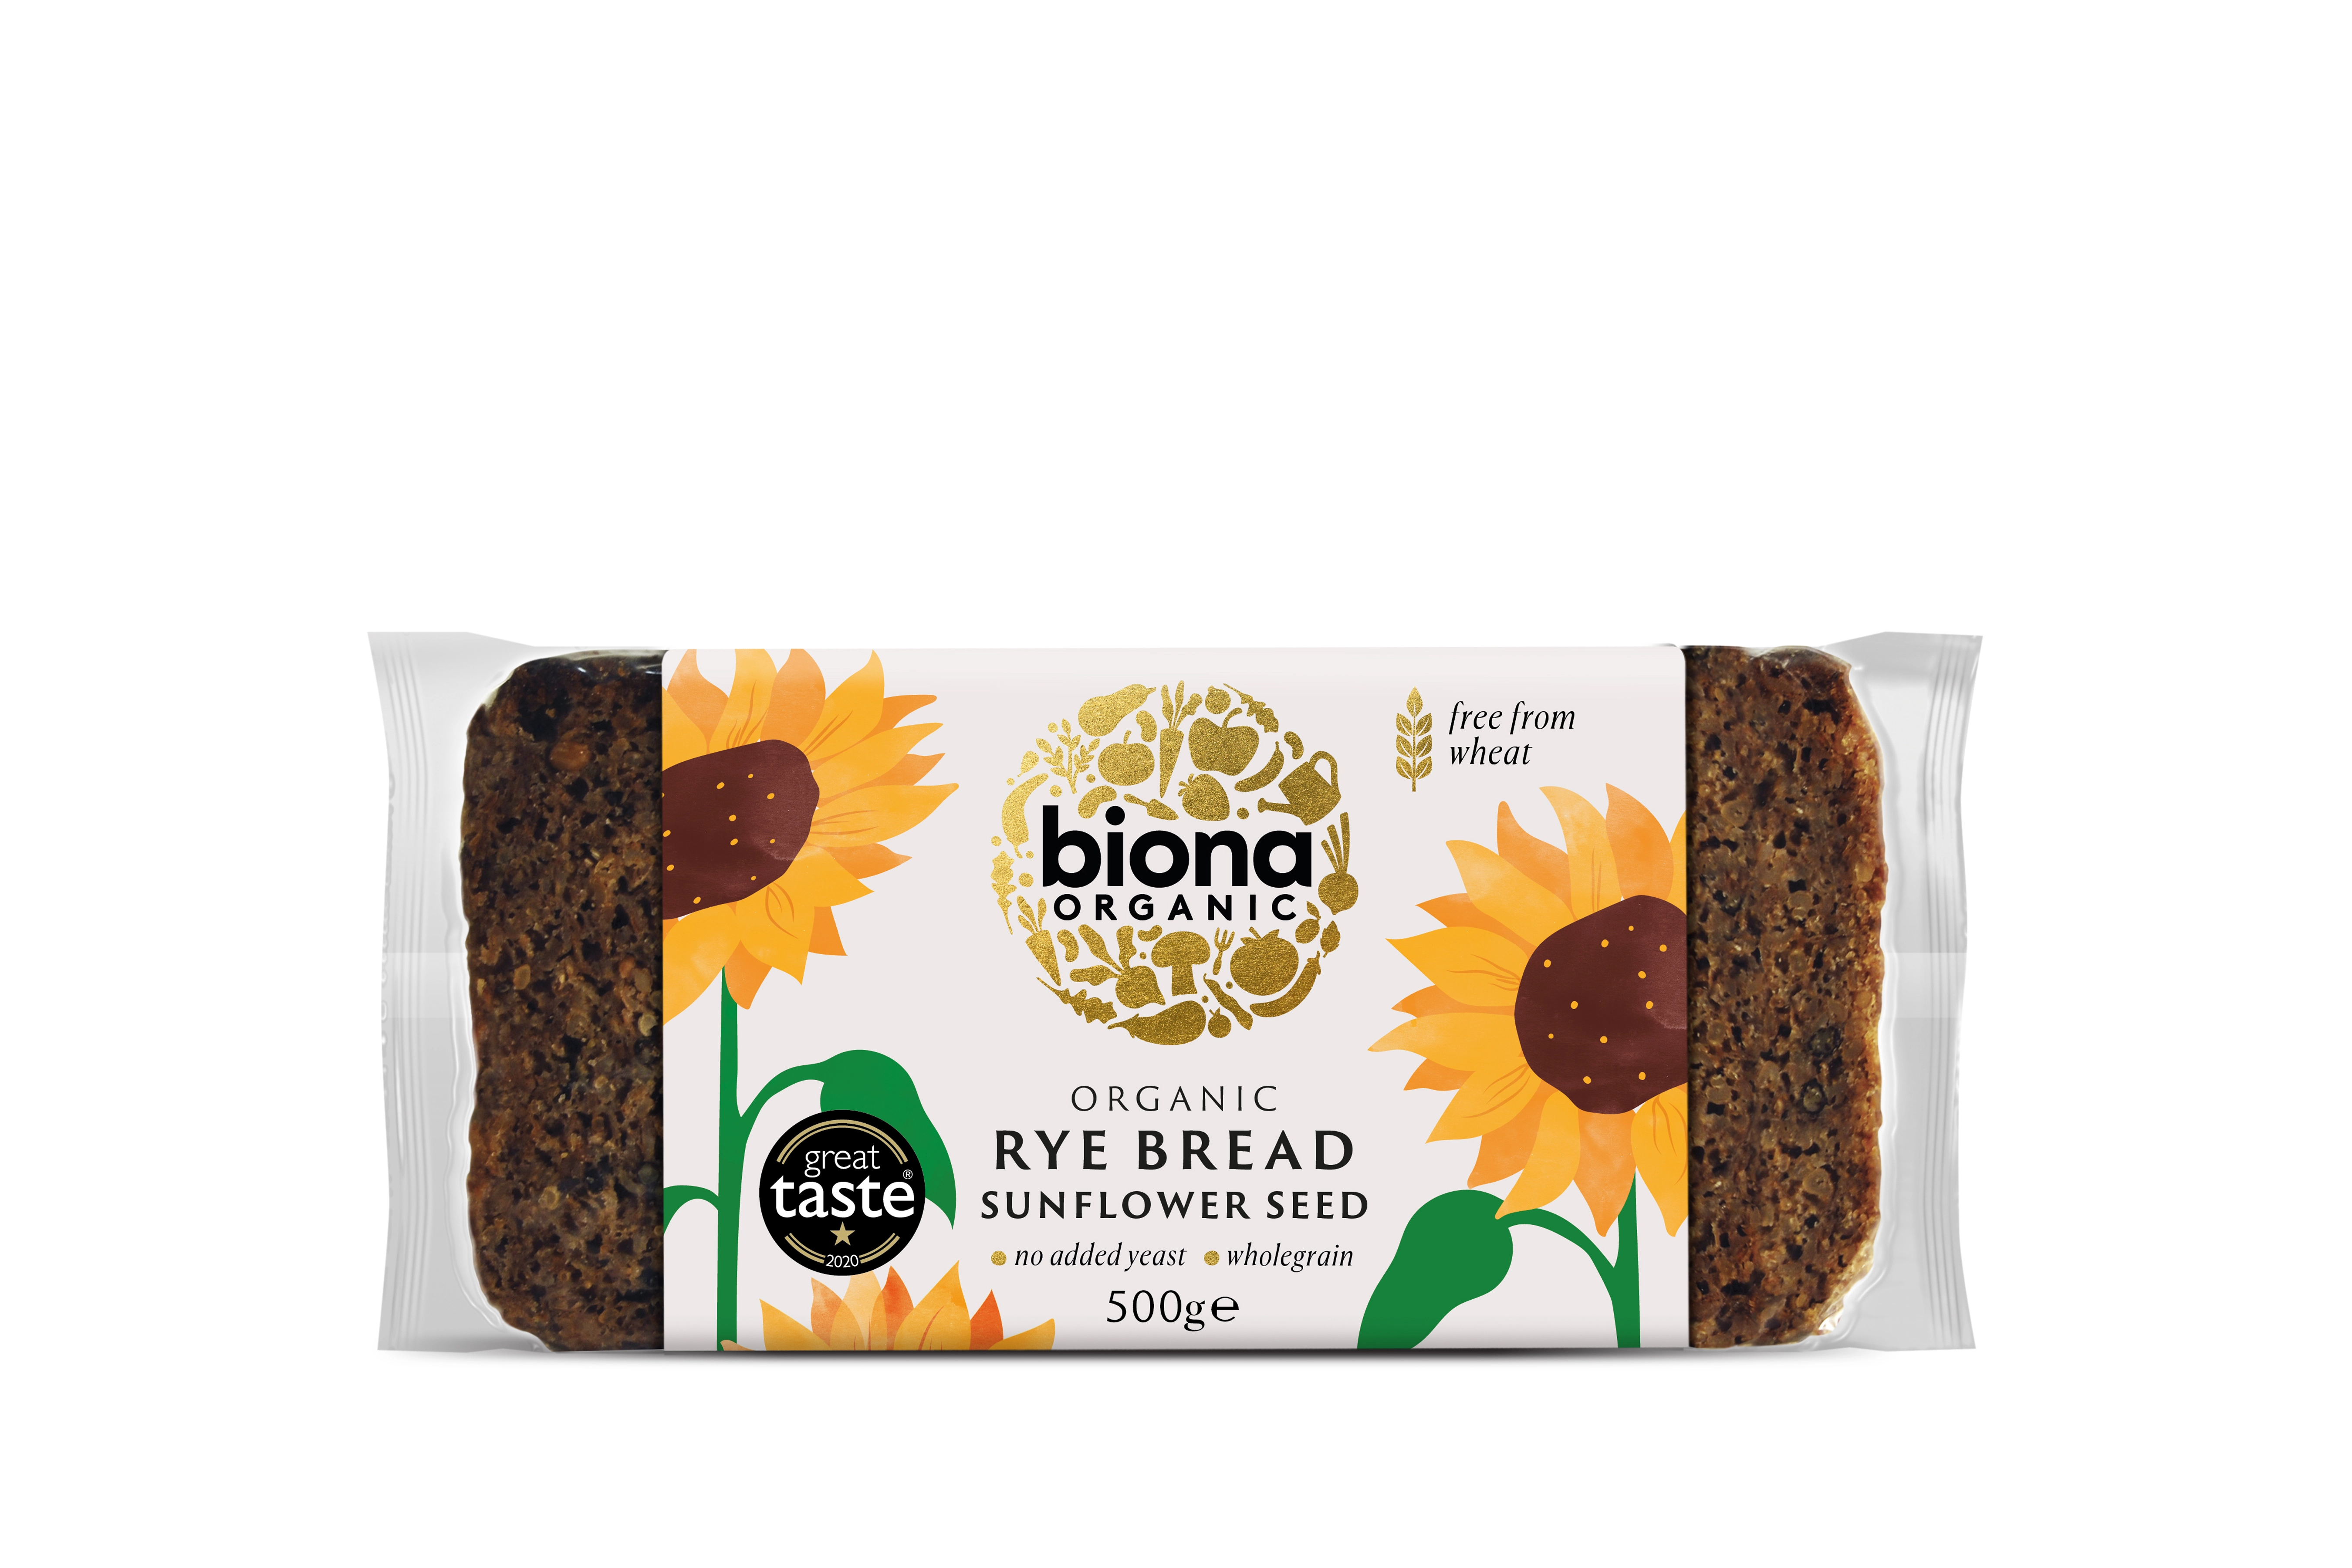 Biona Organic Wholemeal Rye Bread with Sunflower seeds 500g